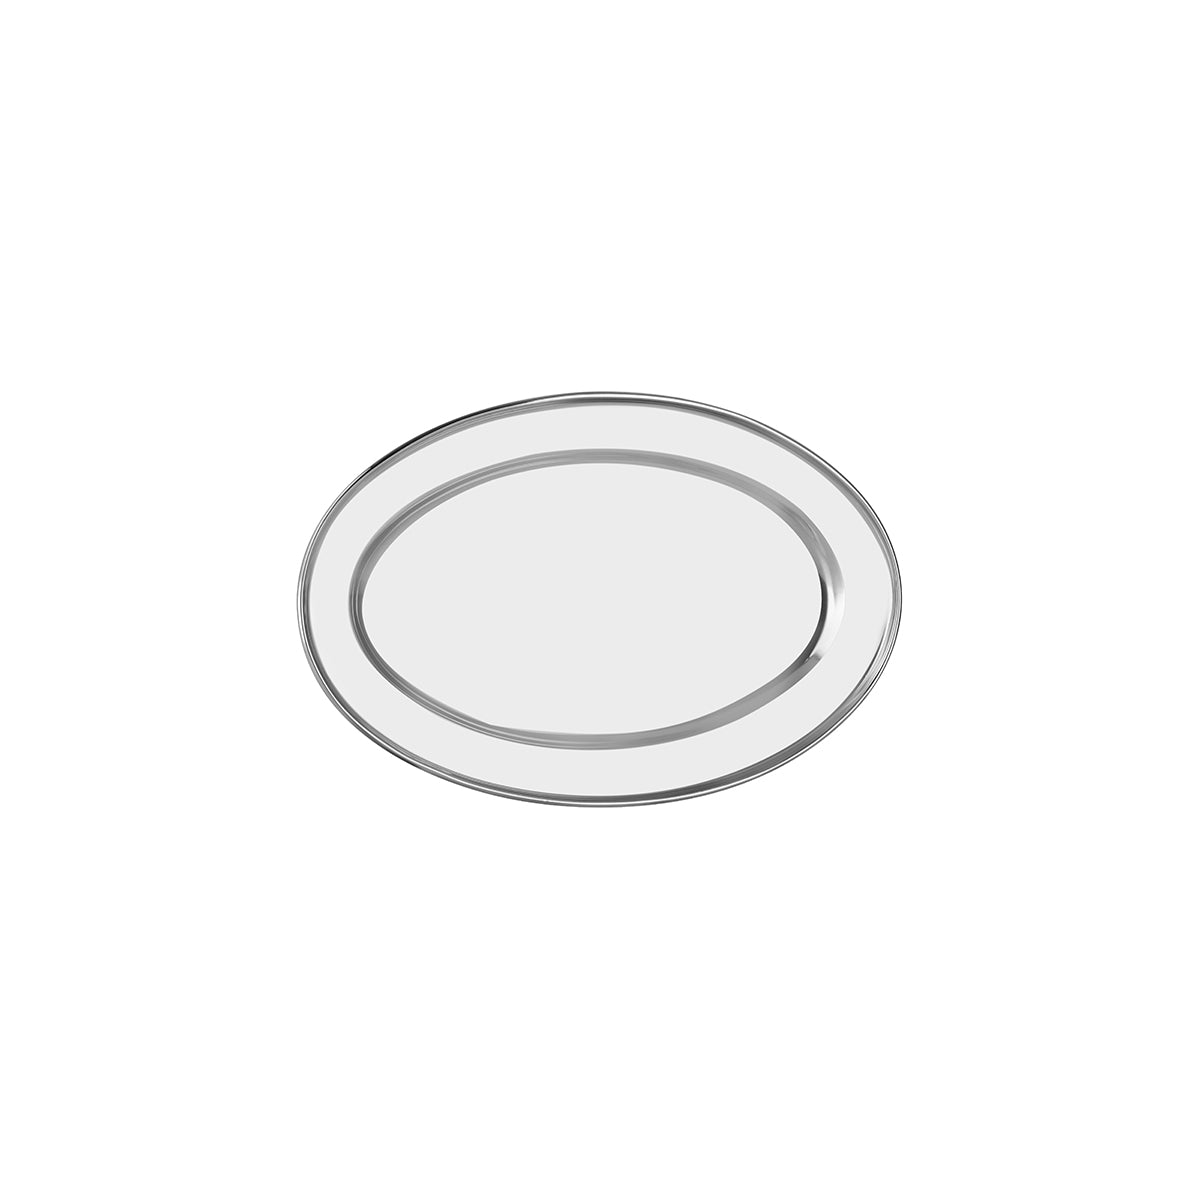 70714 Chef Inox Oval Platter Rolled Edge Stainless Steel 350x270mm Tomkin Australia Hospitality Supplies